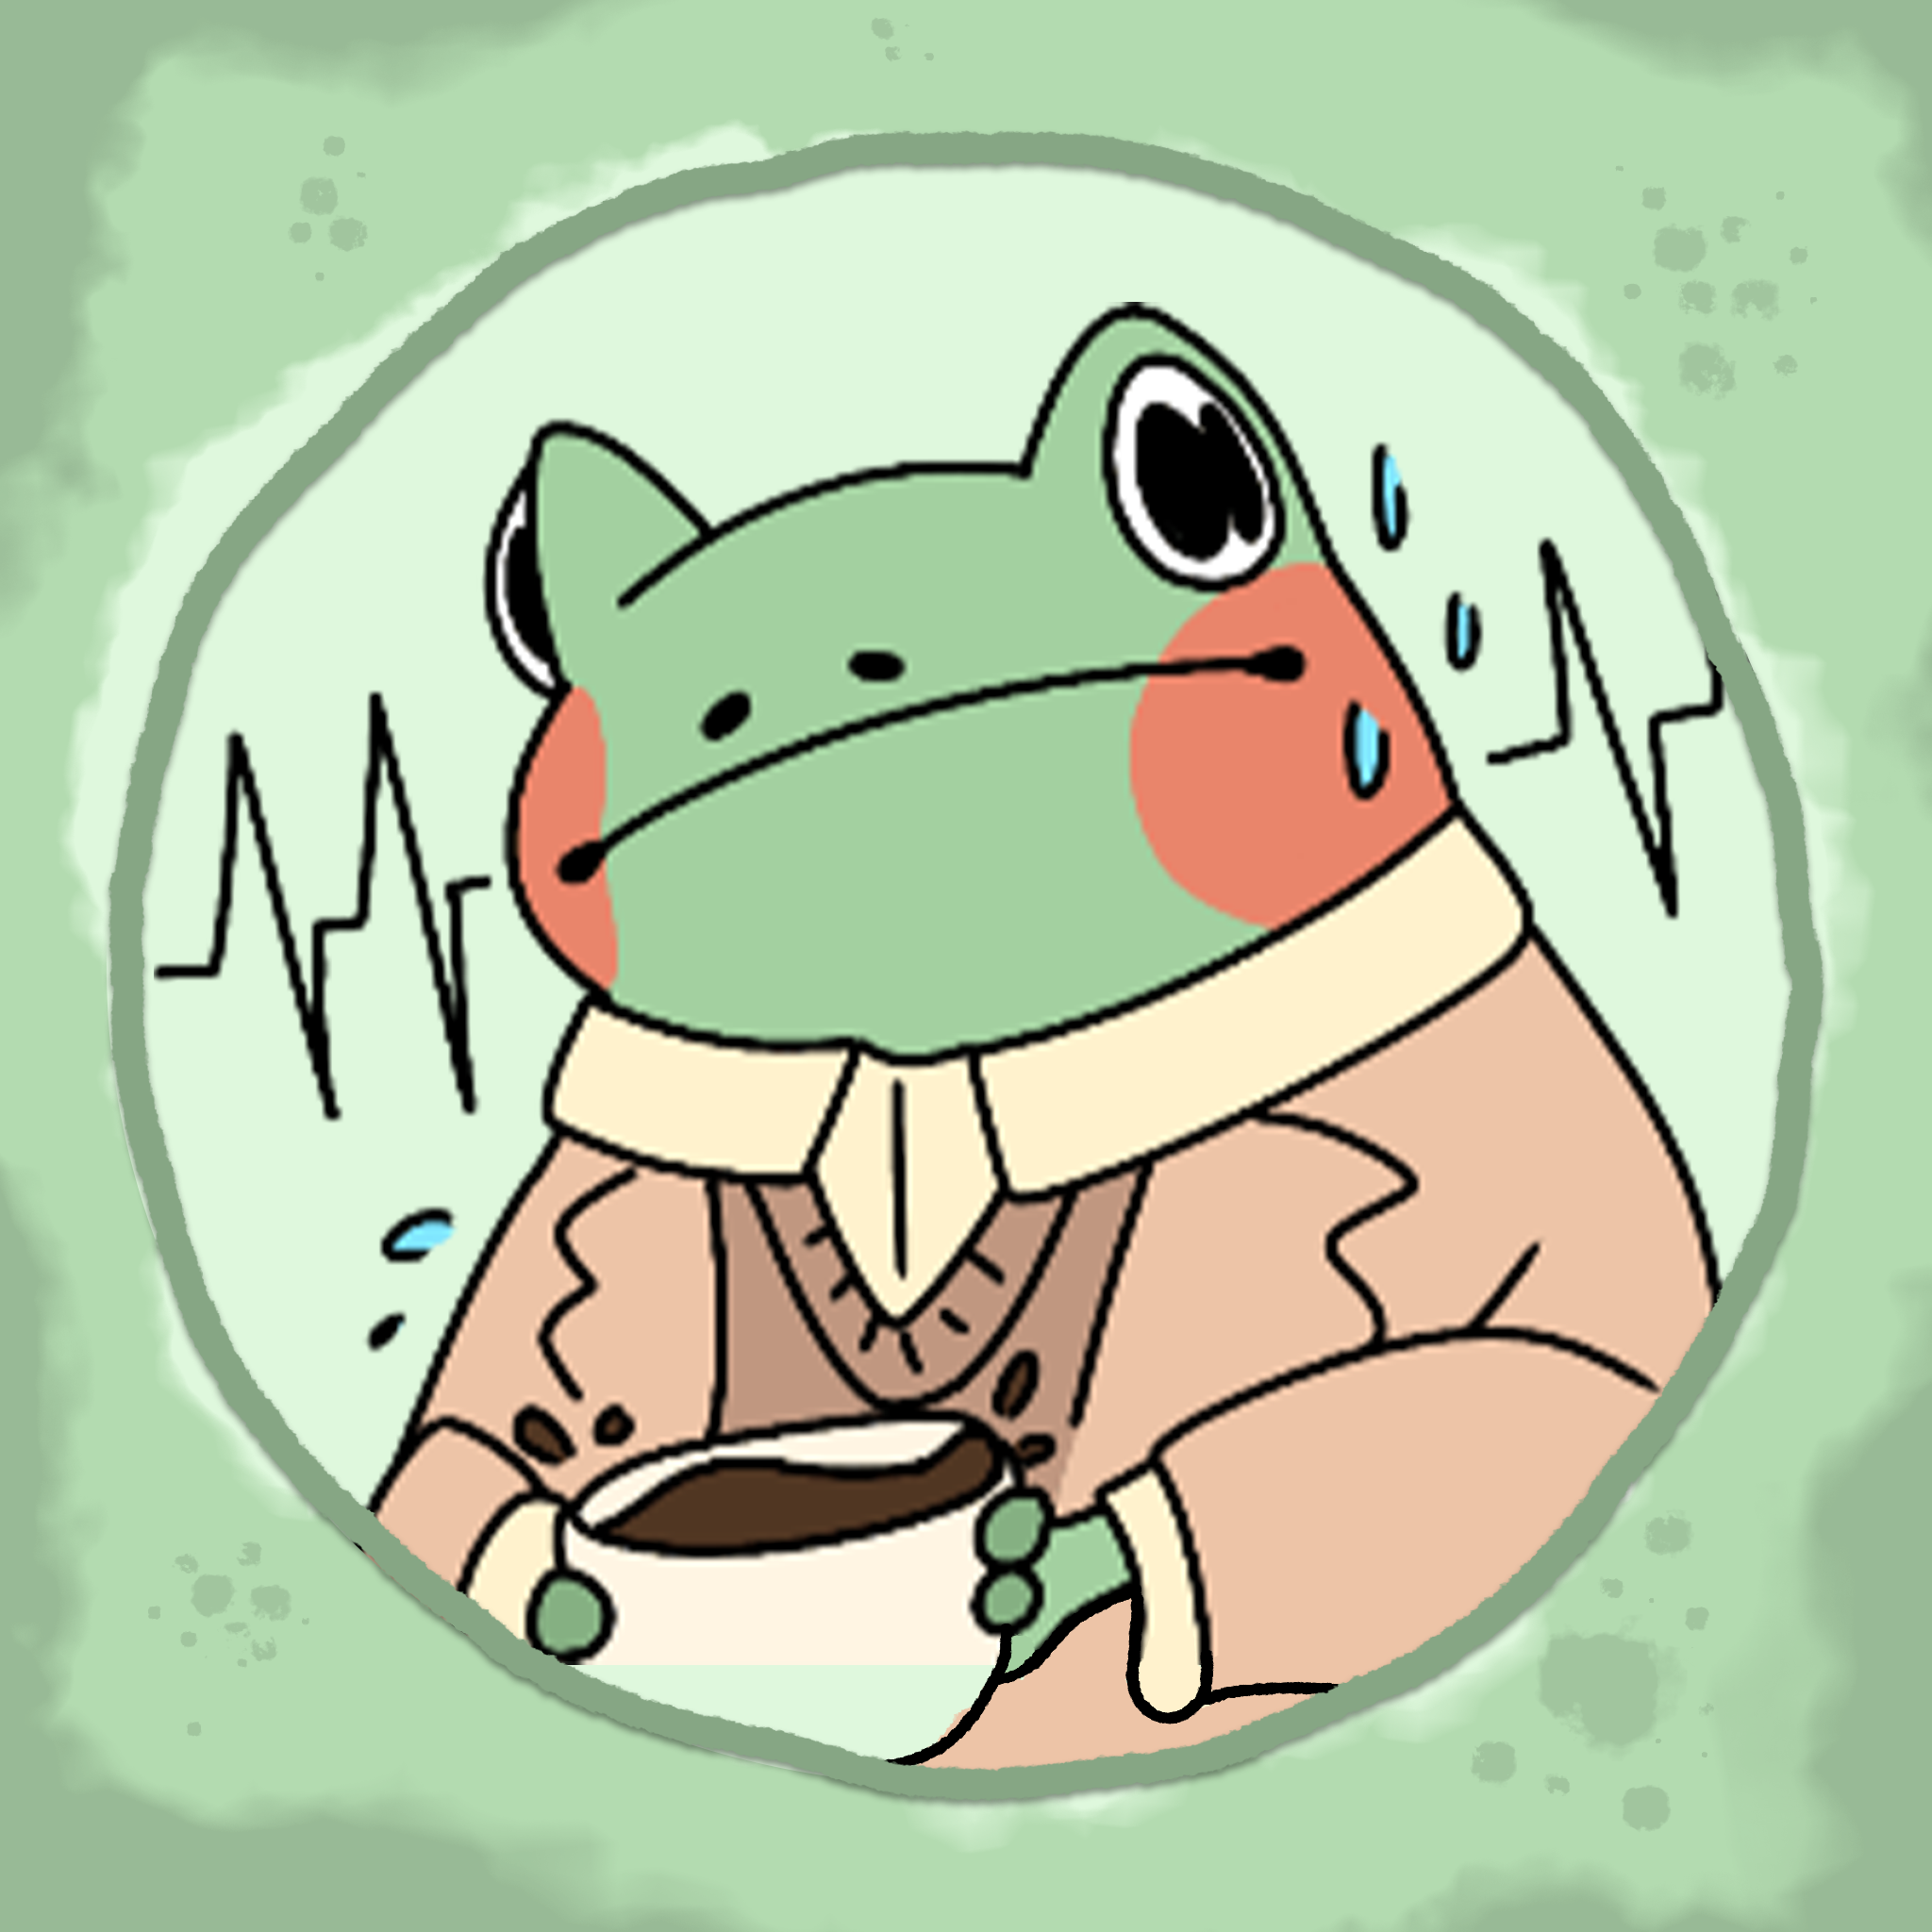 limefrog's Profile Picture on PvPRP